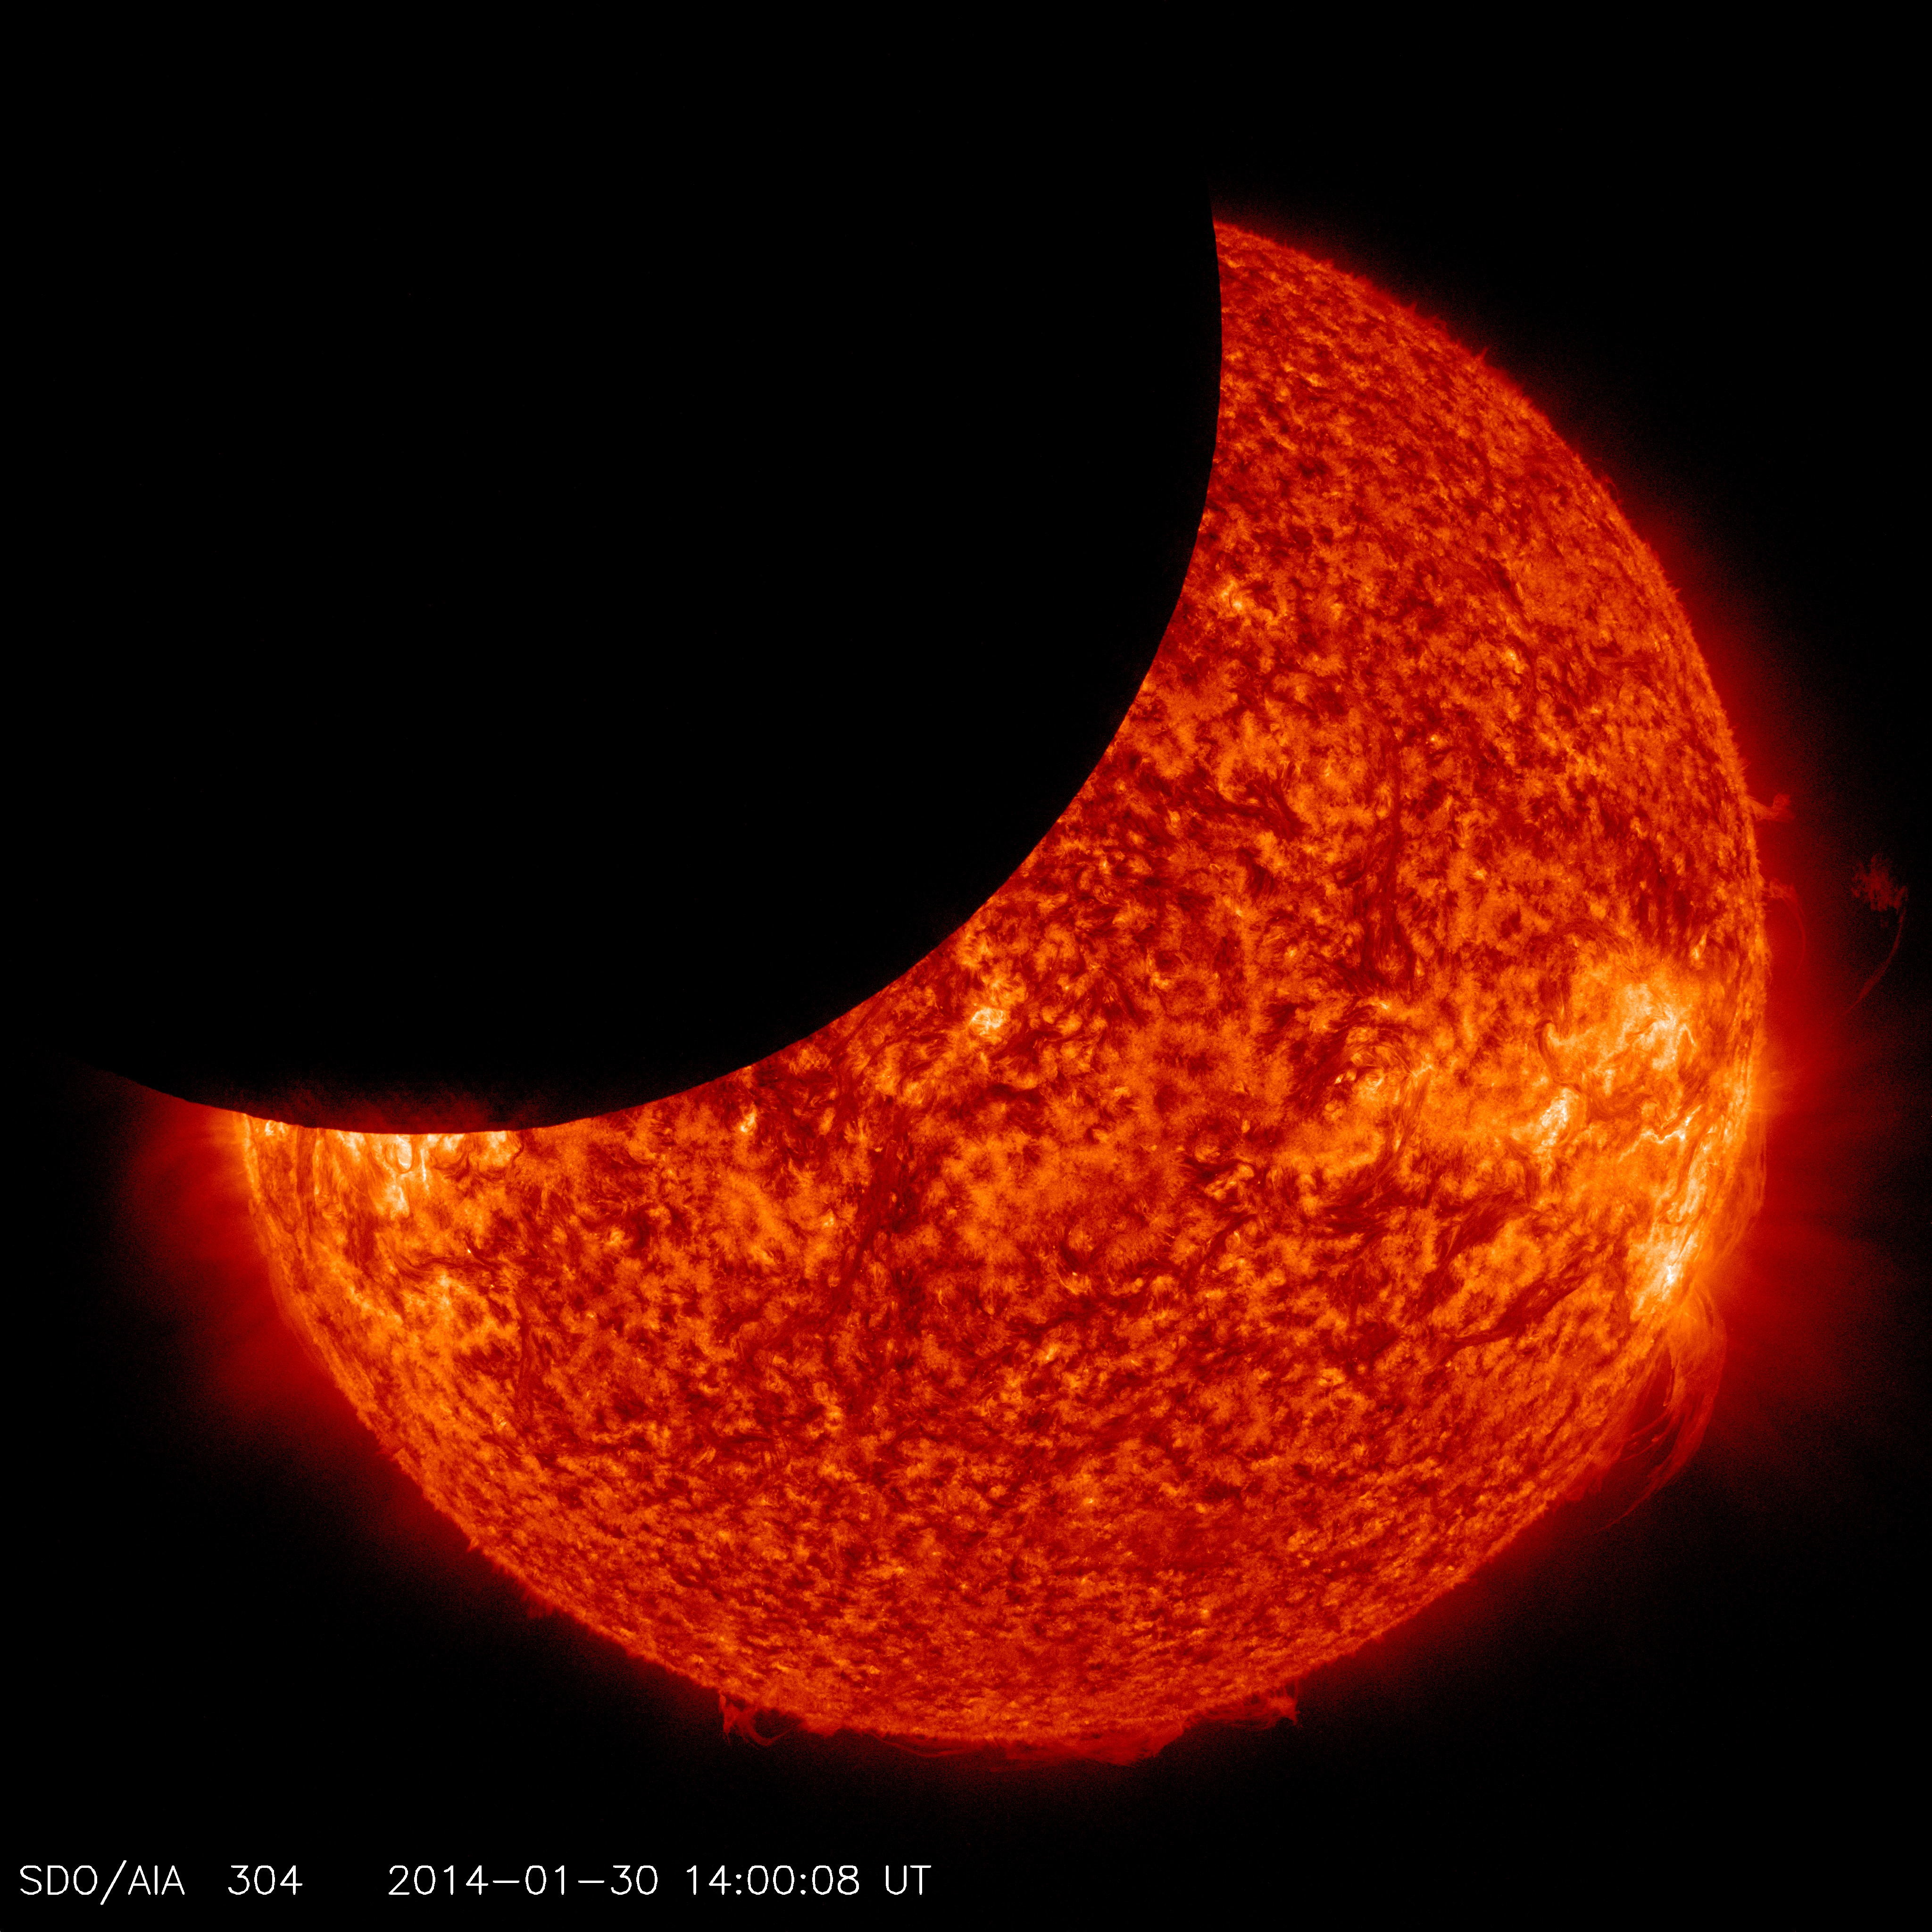 The Sun, seen in red with bright orange area, partially covered by black circle coming from the top left – the Moon.